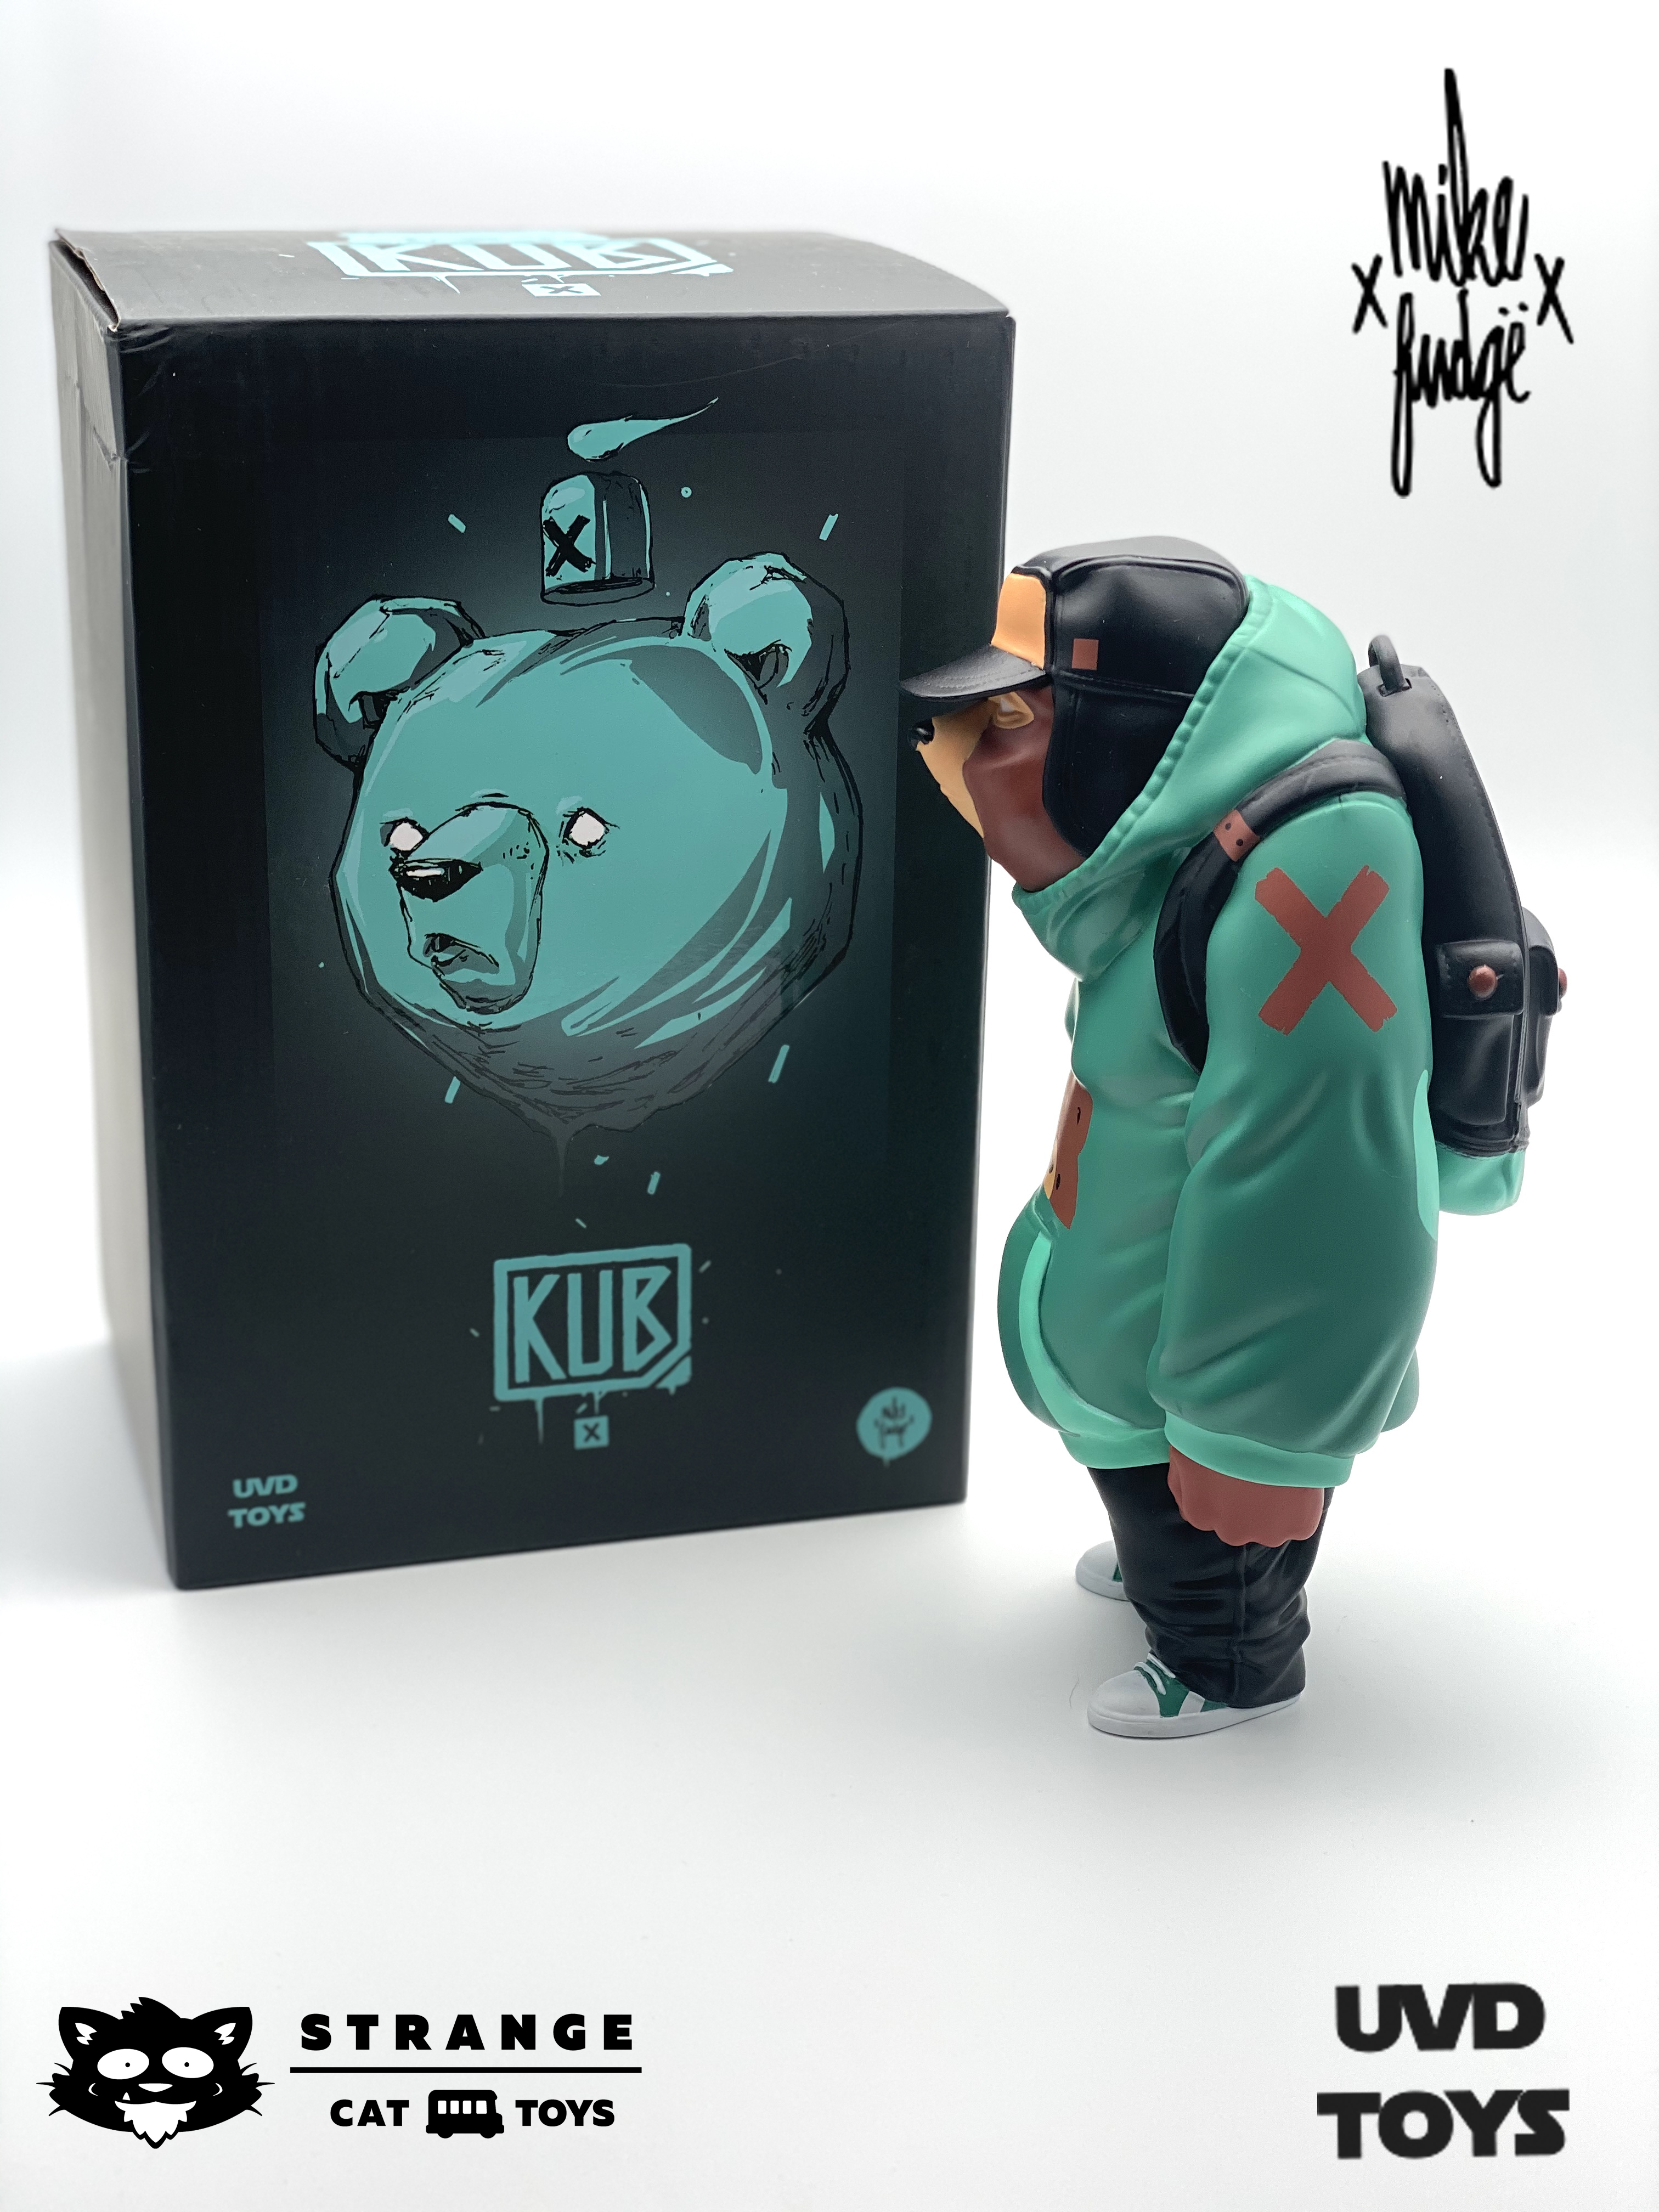 Strangecat Exclusive Kub Teal vinyl art toy from artist Mike Fudge and UVD Toys.